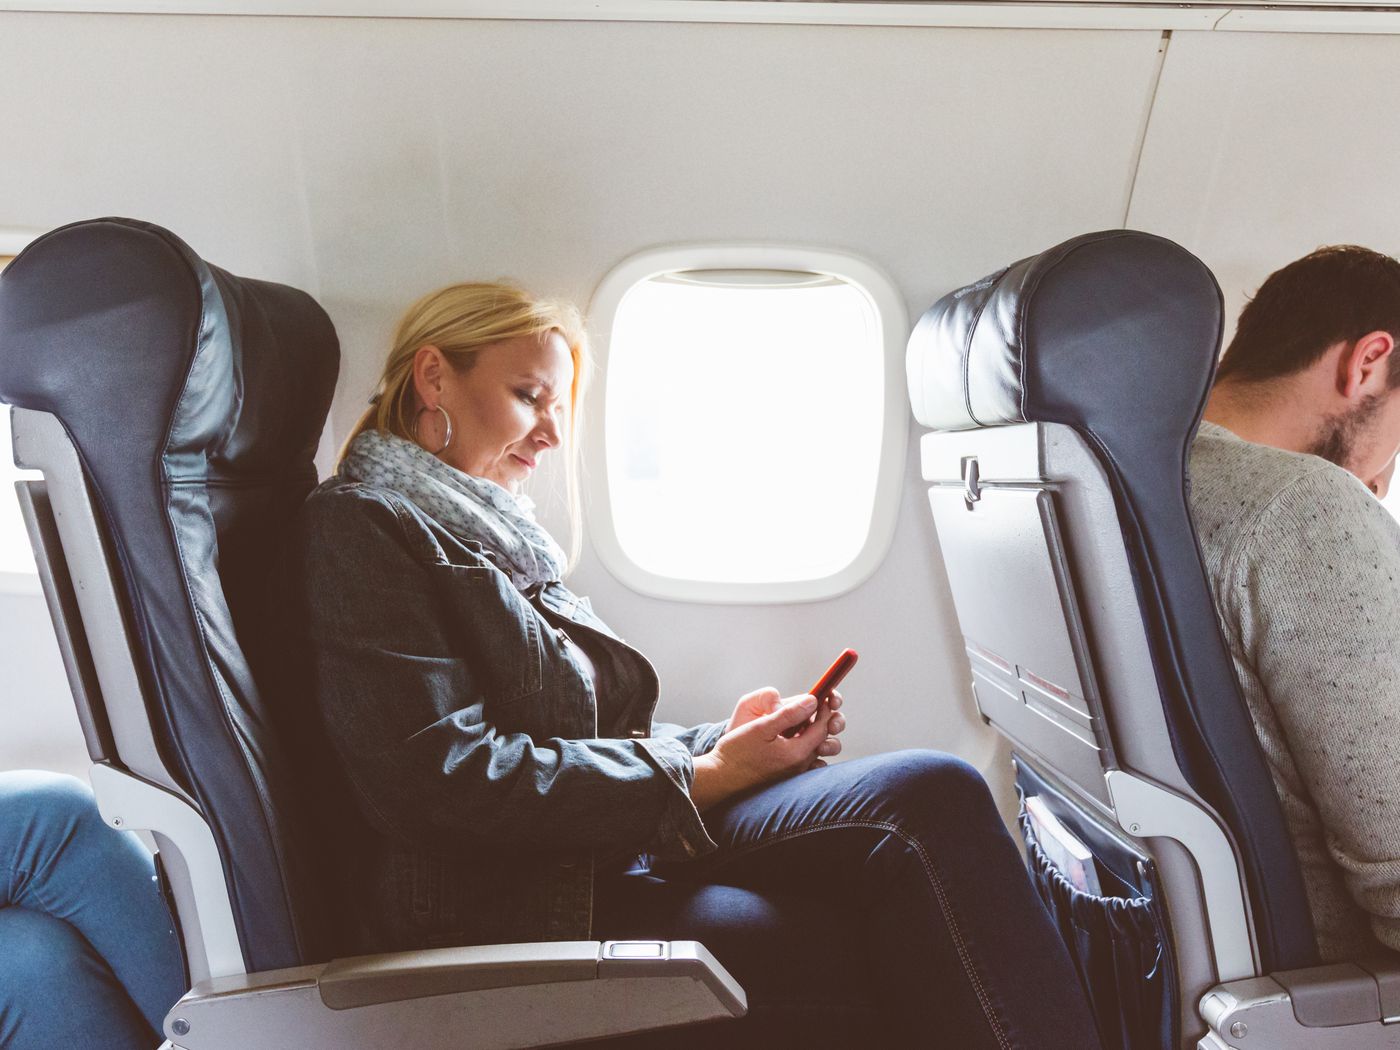 Should you recline on an airplane? The perennial seat debate, explained. - Vox